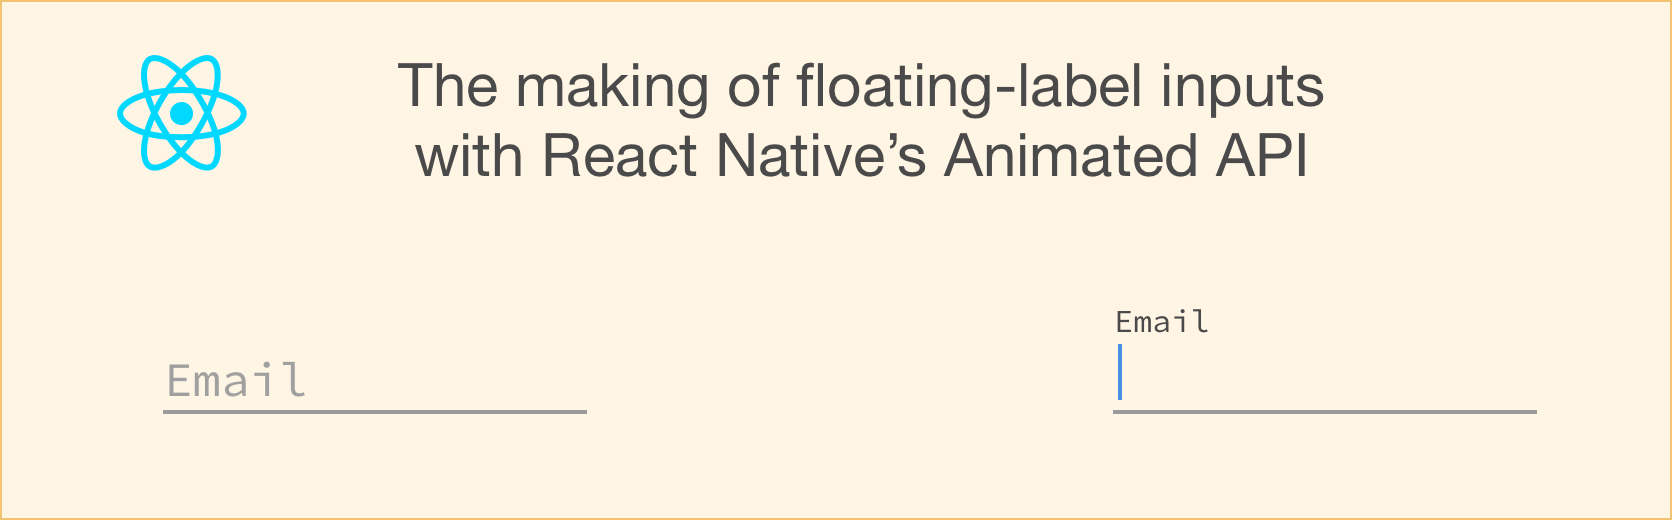 Cover image: The making of a floating-label input with React Native's Animated API